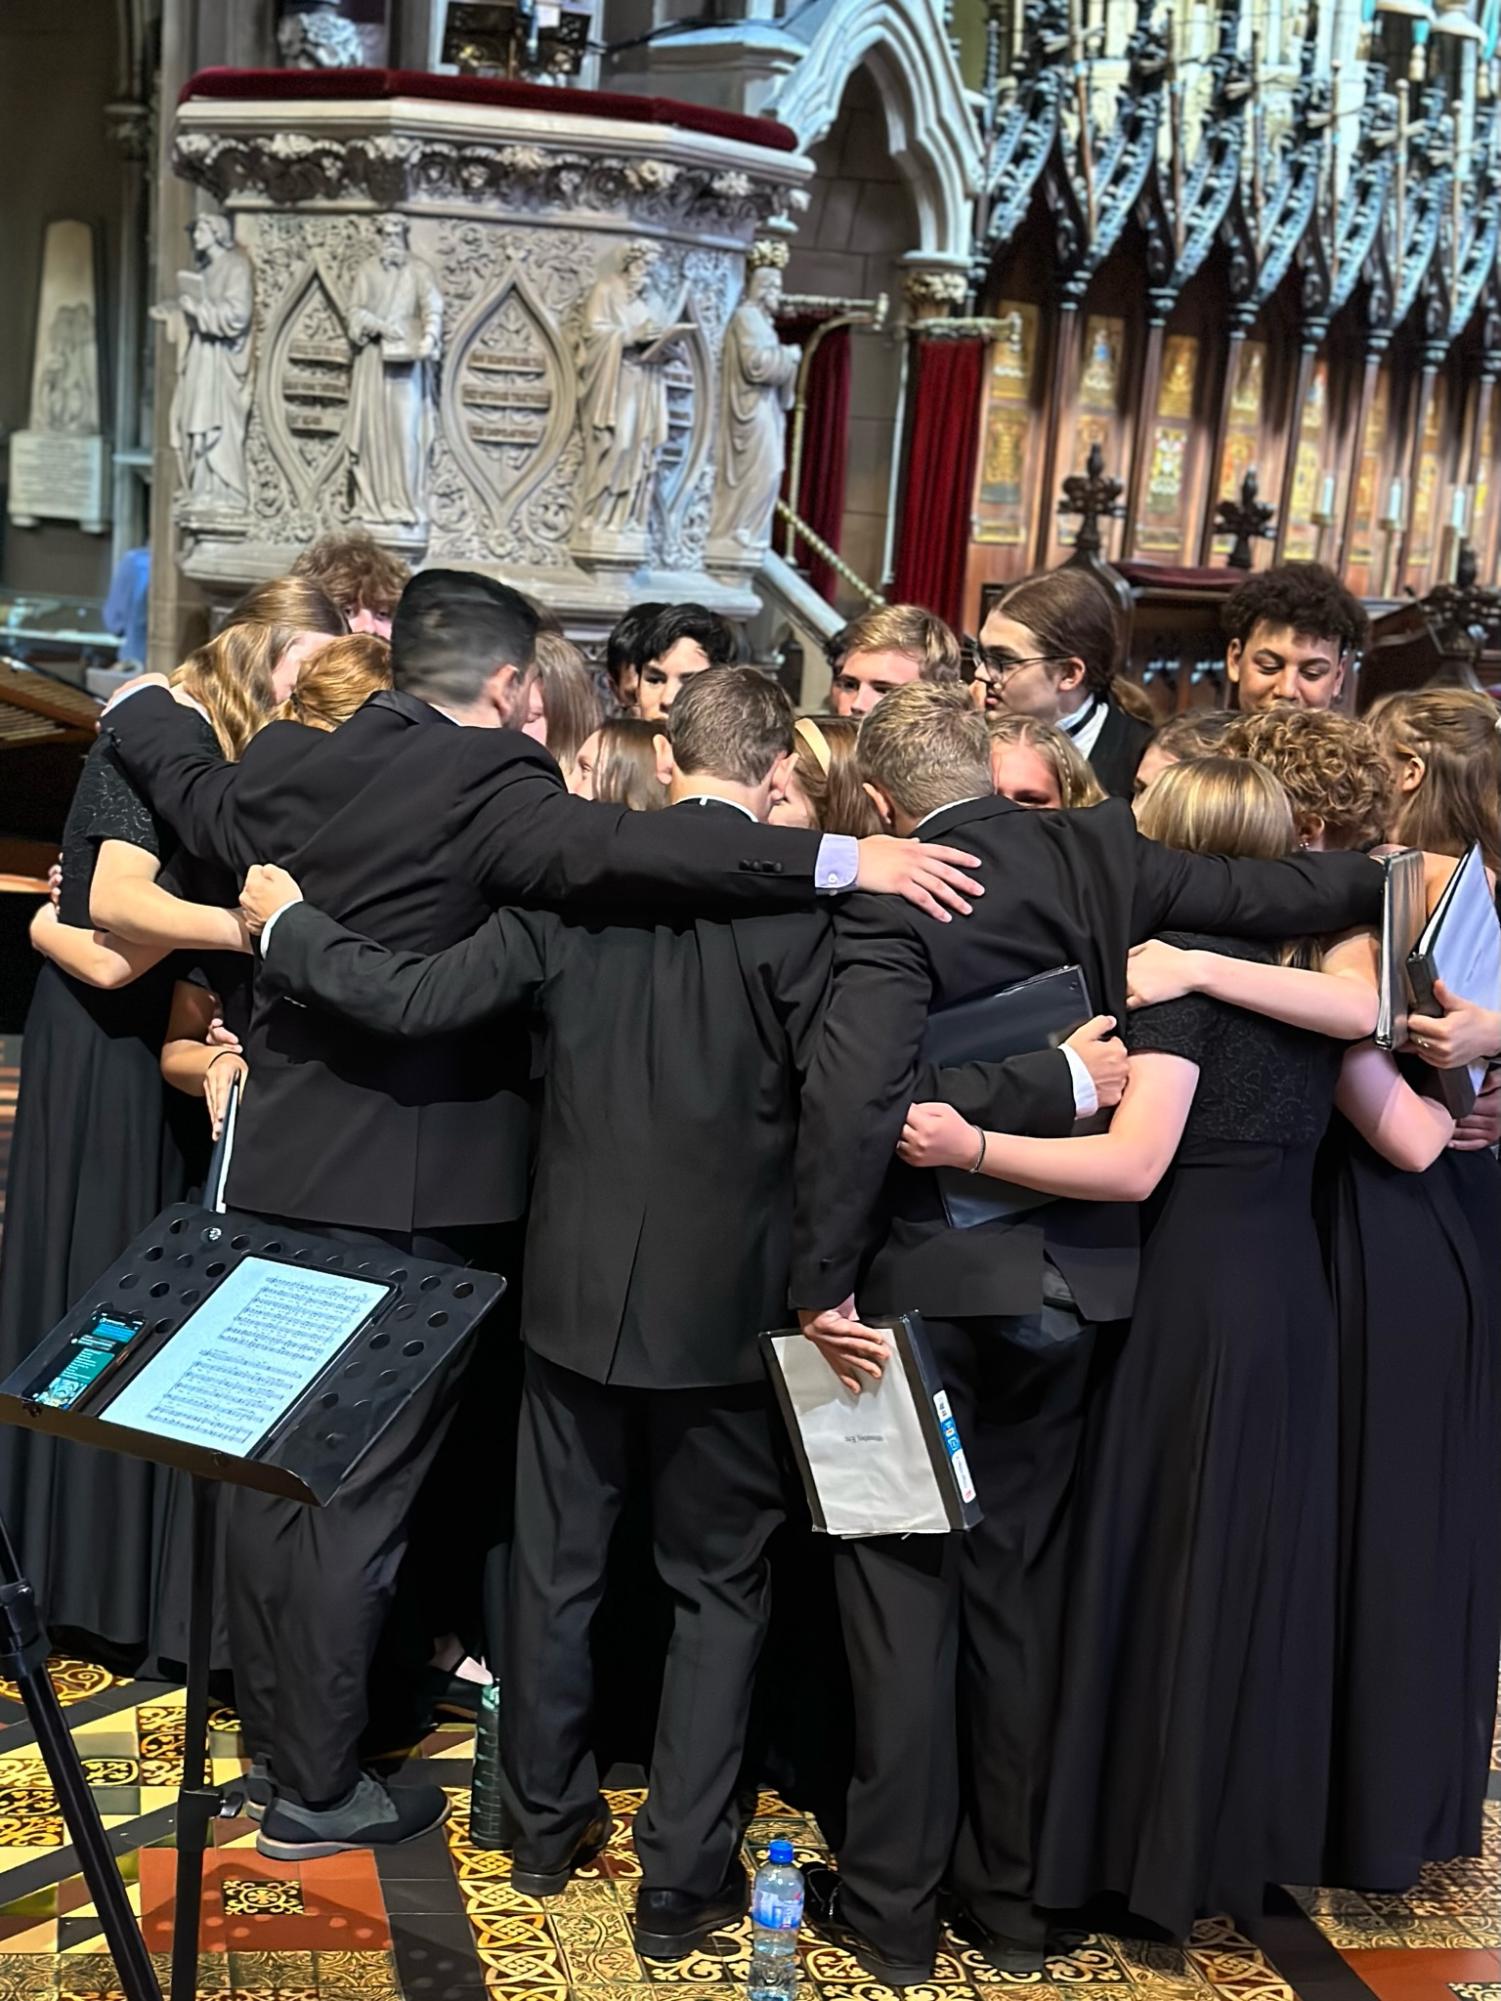 The Chamber Choir shares a touching moment at the end of their last concert together at St. Patricks Cathedral. Used with permission/Gretchen Fritsch.